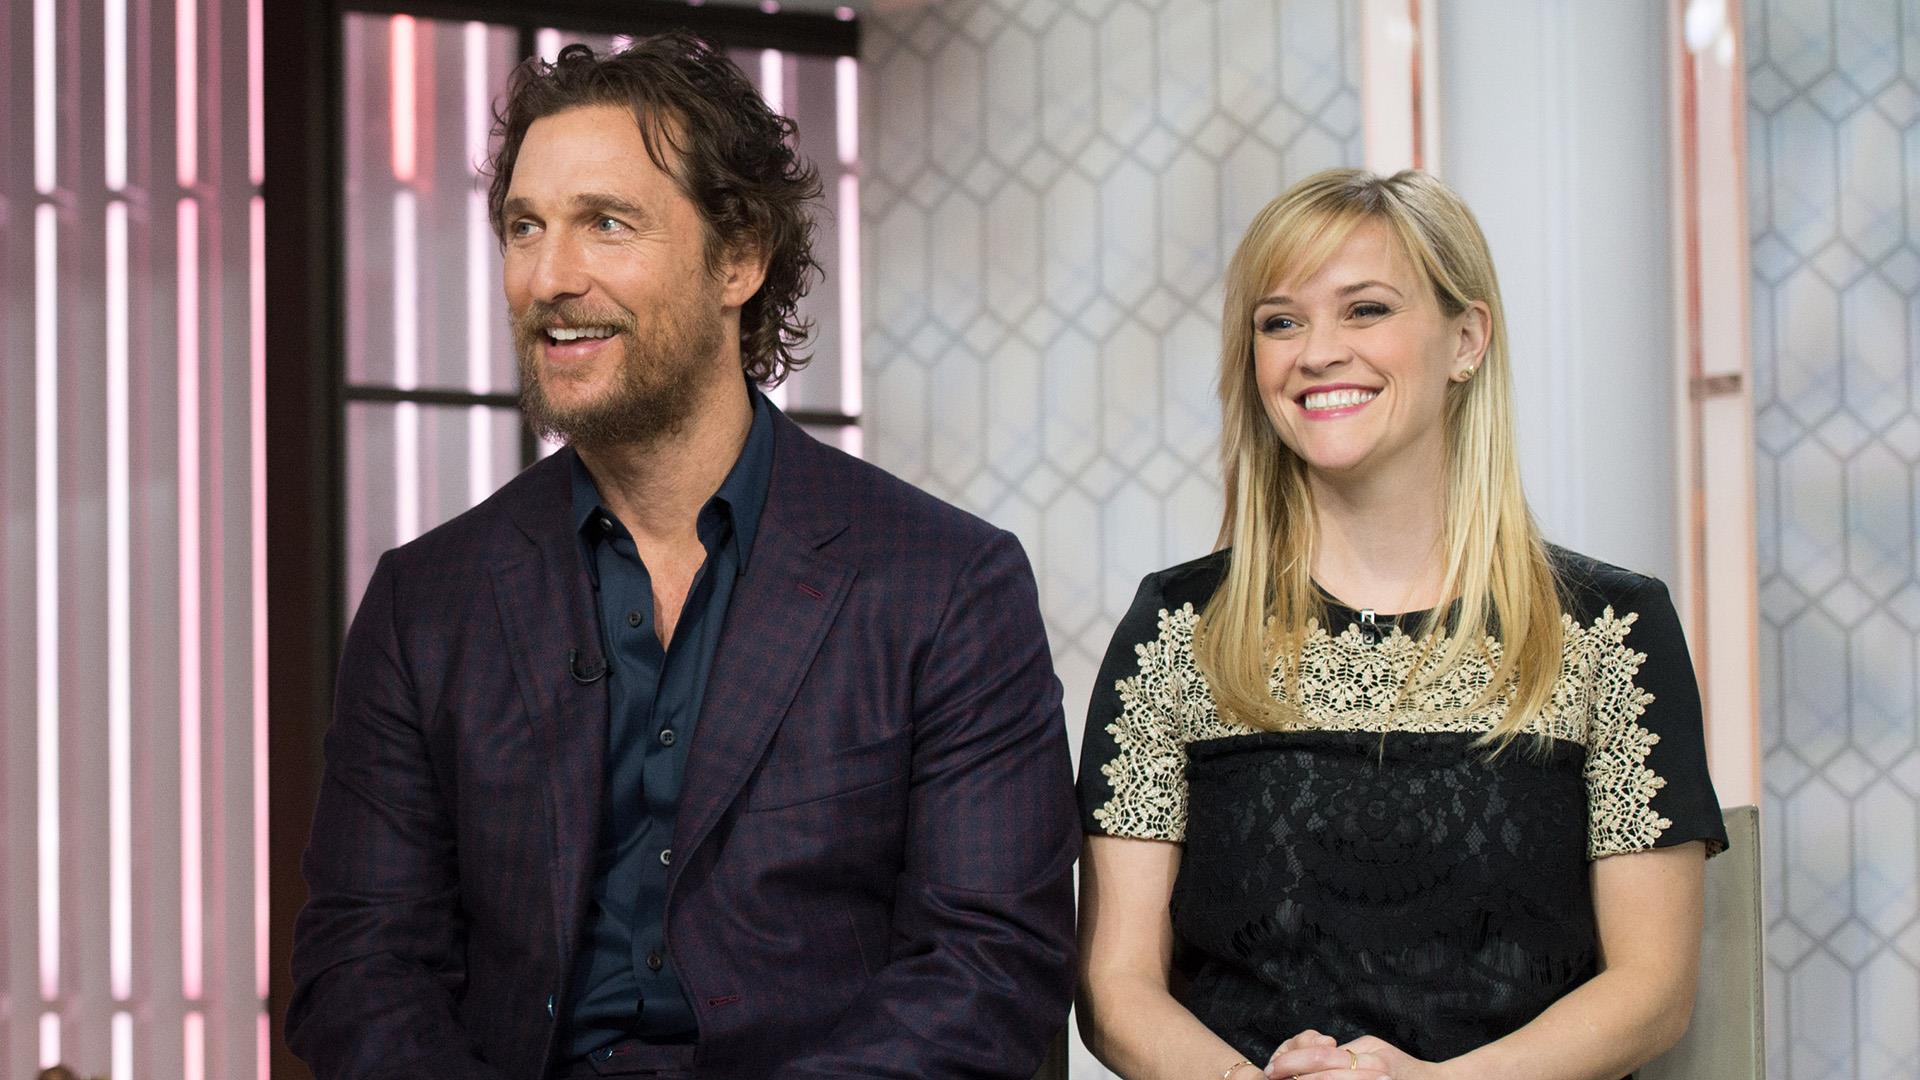 Reese Witherspoon and Matthew McConaughey on 'Sing' and parenthood